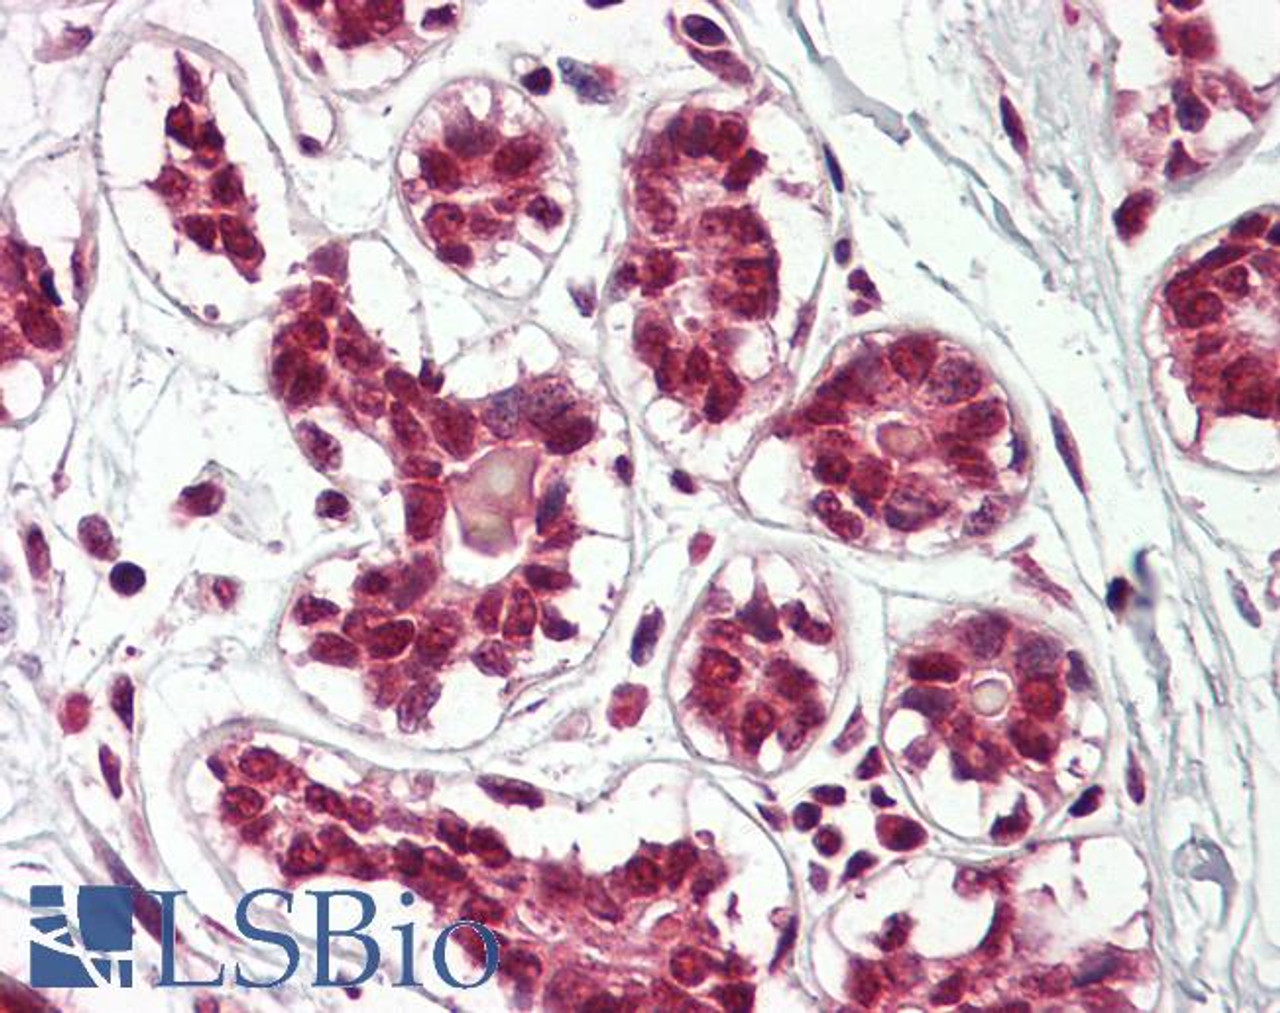 43-145 (2ug/ml) staining of paraffin embedded Human Kidney. Microwaved antigen retrieval with citrate buffer pH 6, HRP-staining.